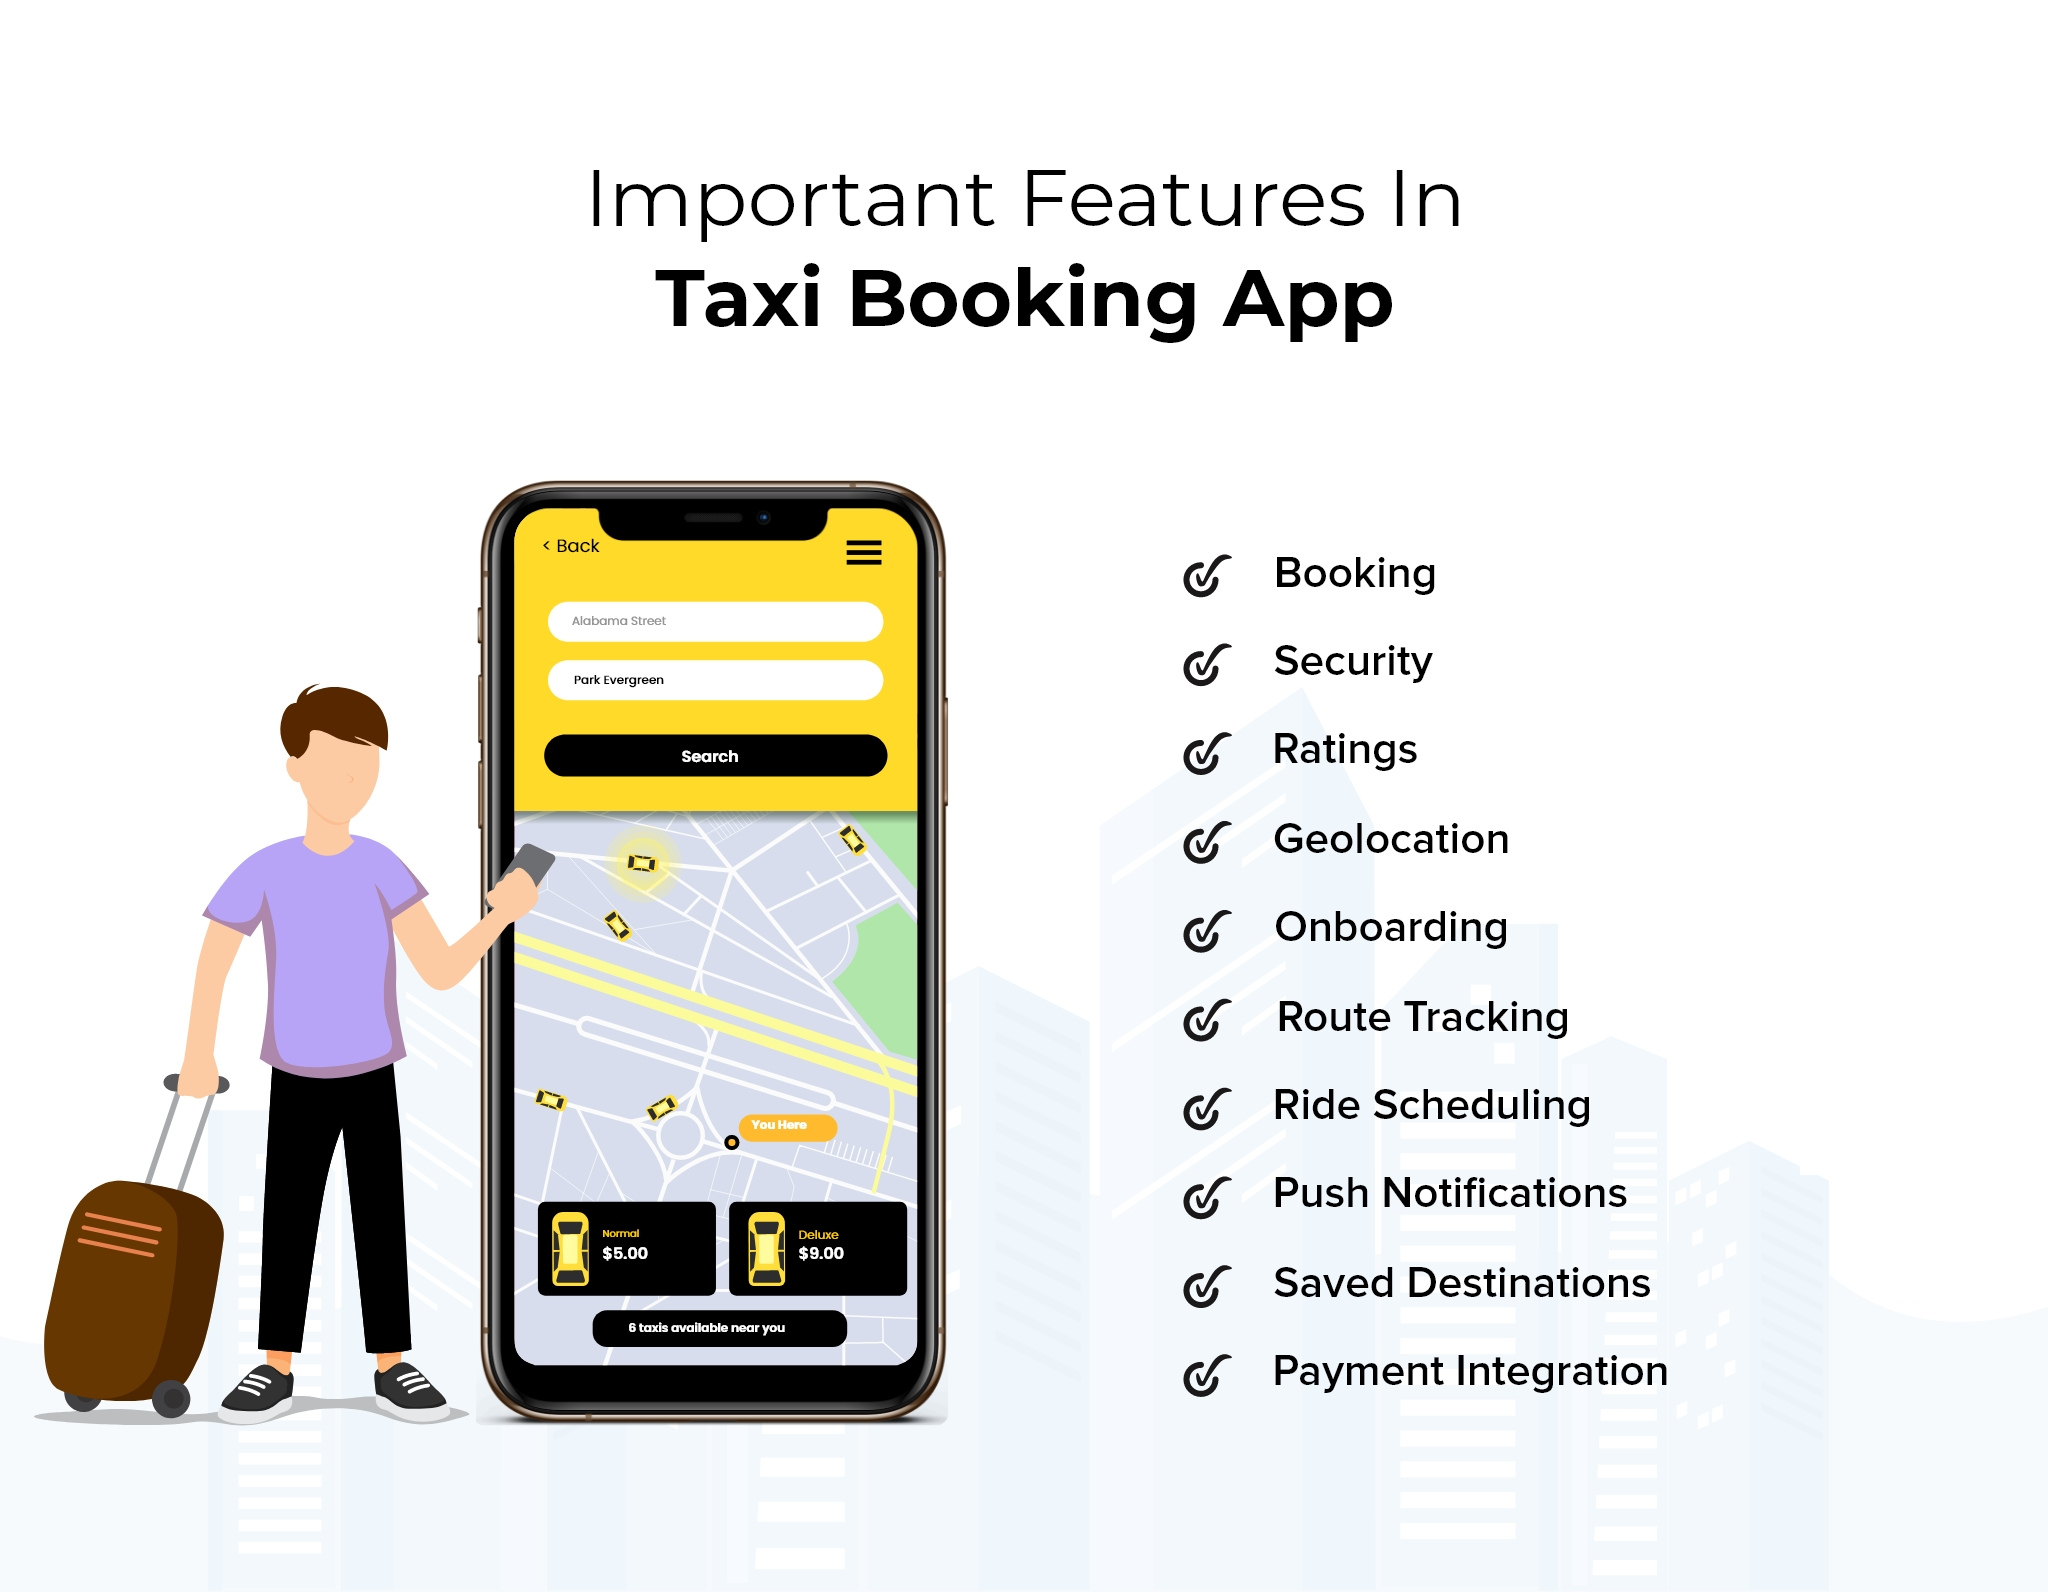 Features of taxi booking app